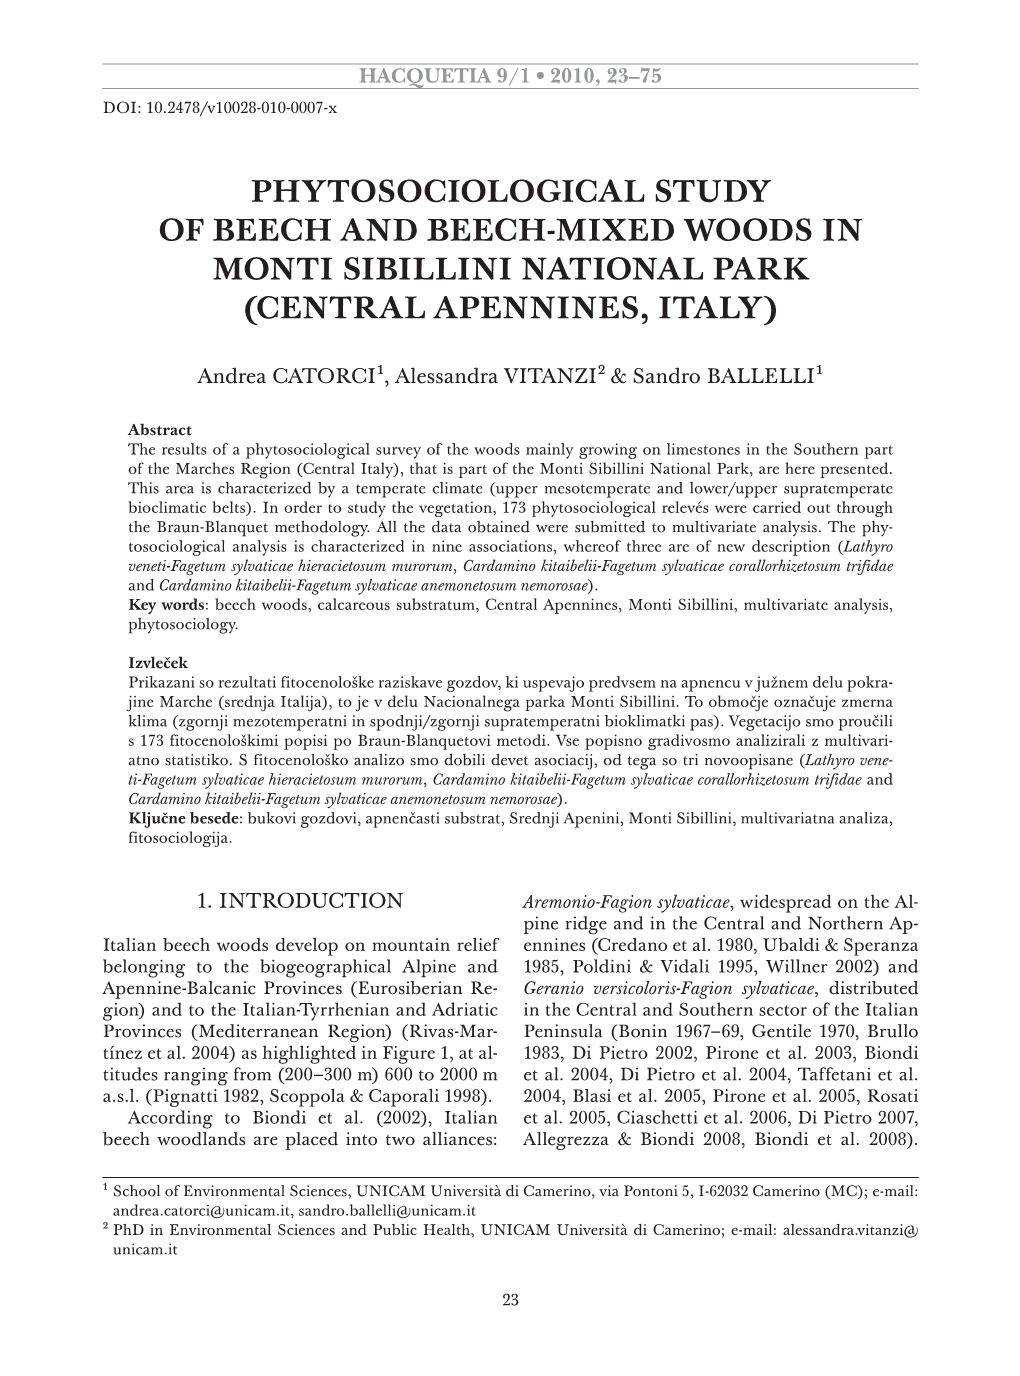 Phytosociological Study of Beech and Beech-Mixed Woods in Monti Sibillini National Park (Central Apennines, Italy)